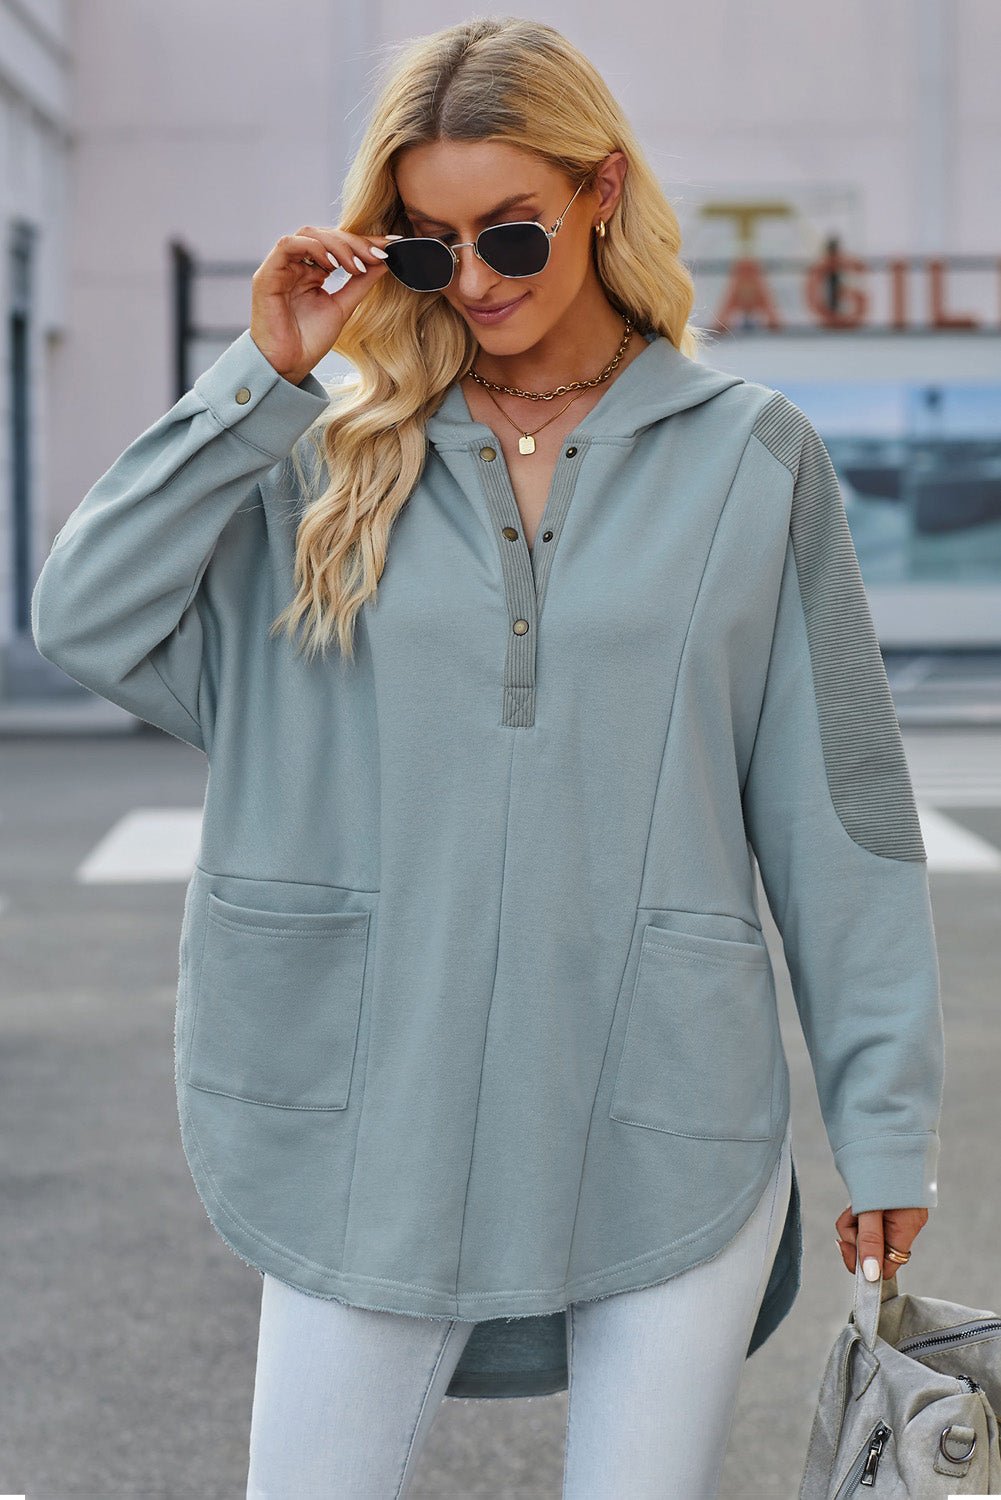 Long Sleeve Buttoned Hoodie with Pockets - Fashion Girl Online Store